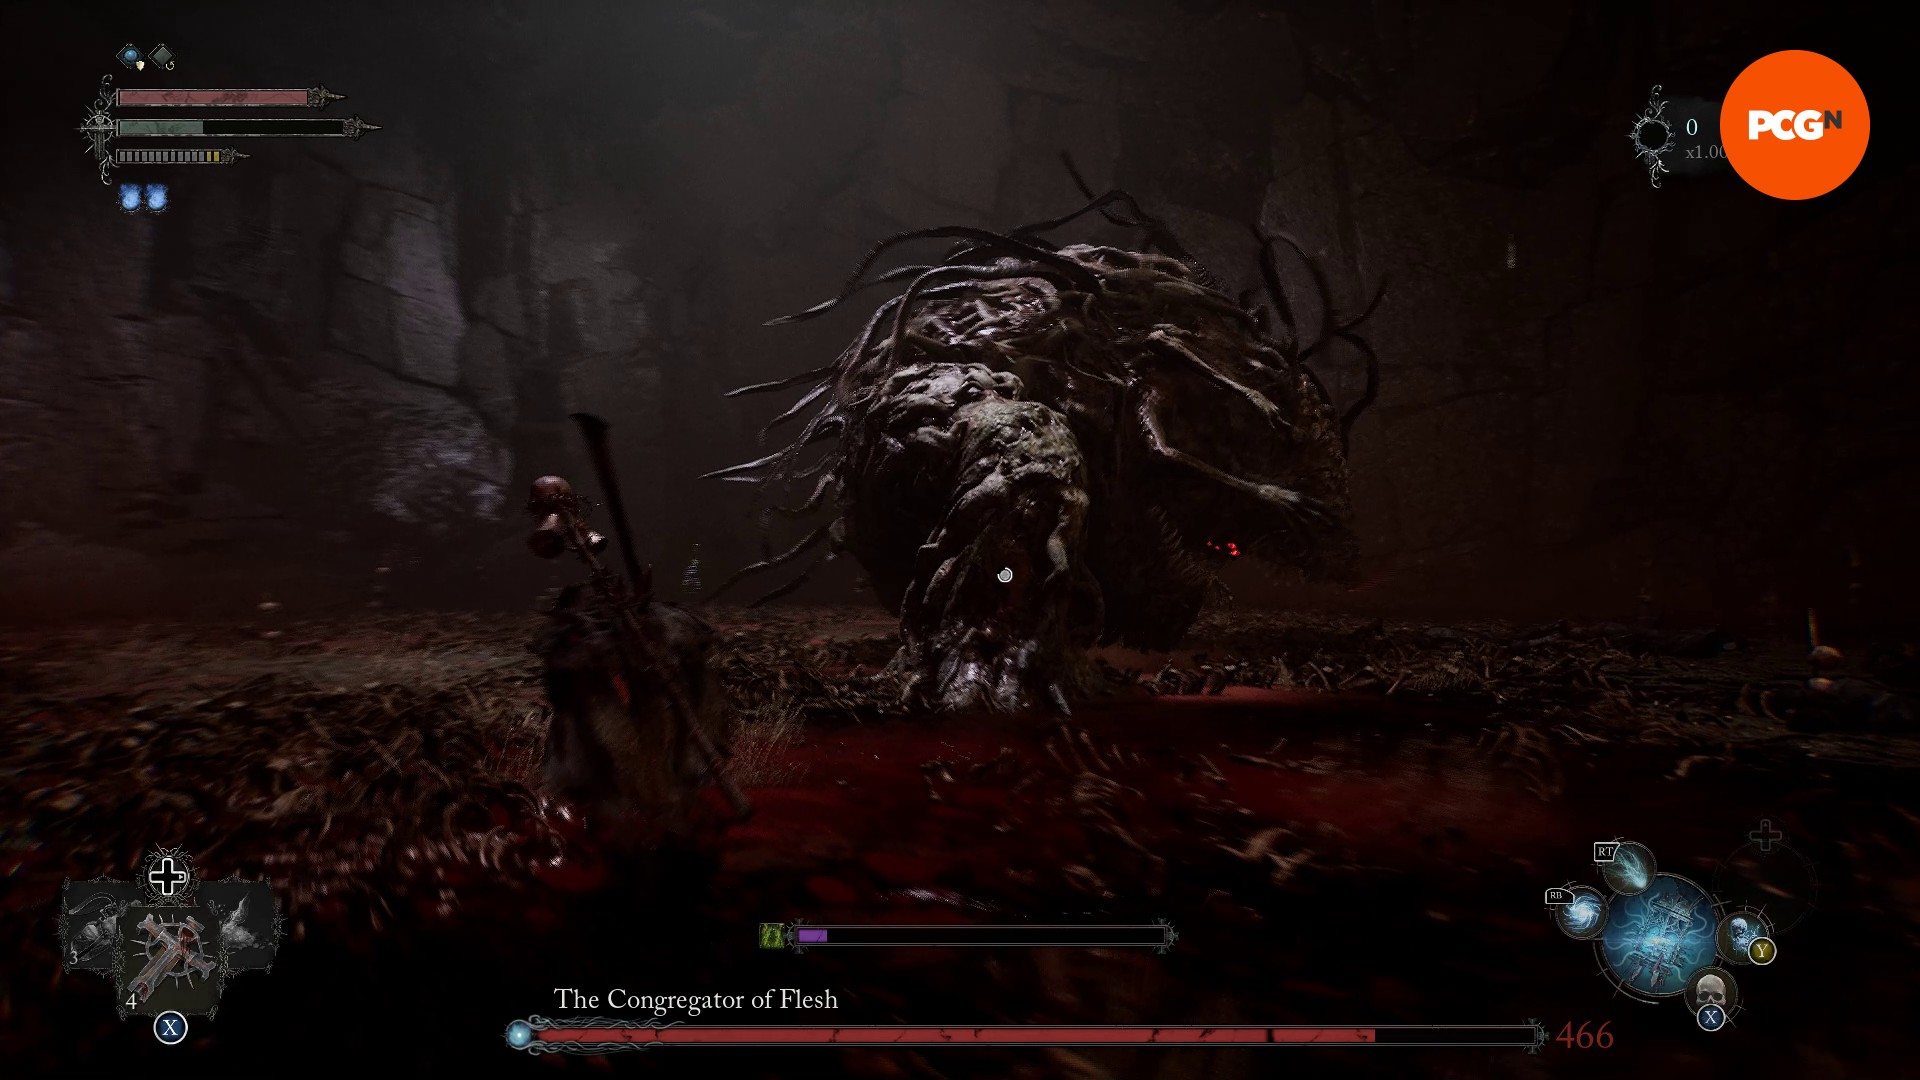 Soulslike Lords Of The Fallen's massive bosses and dual worlds